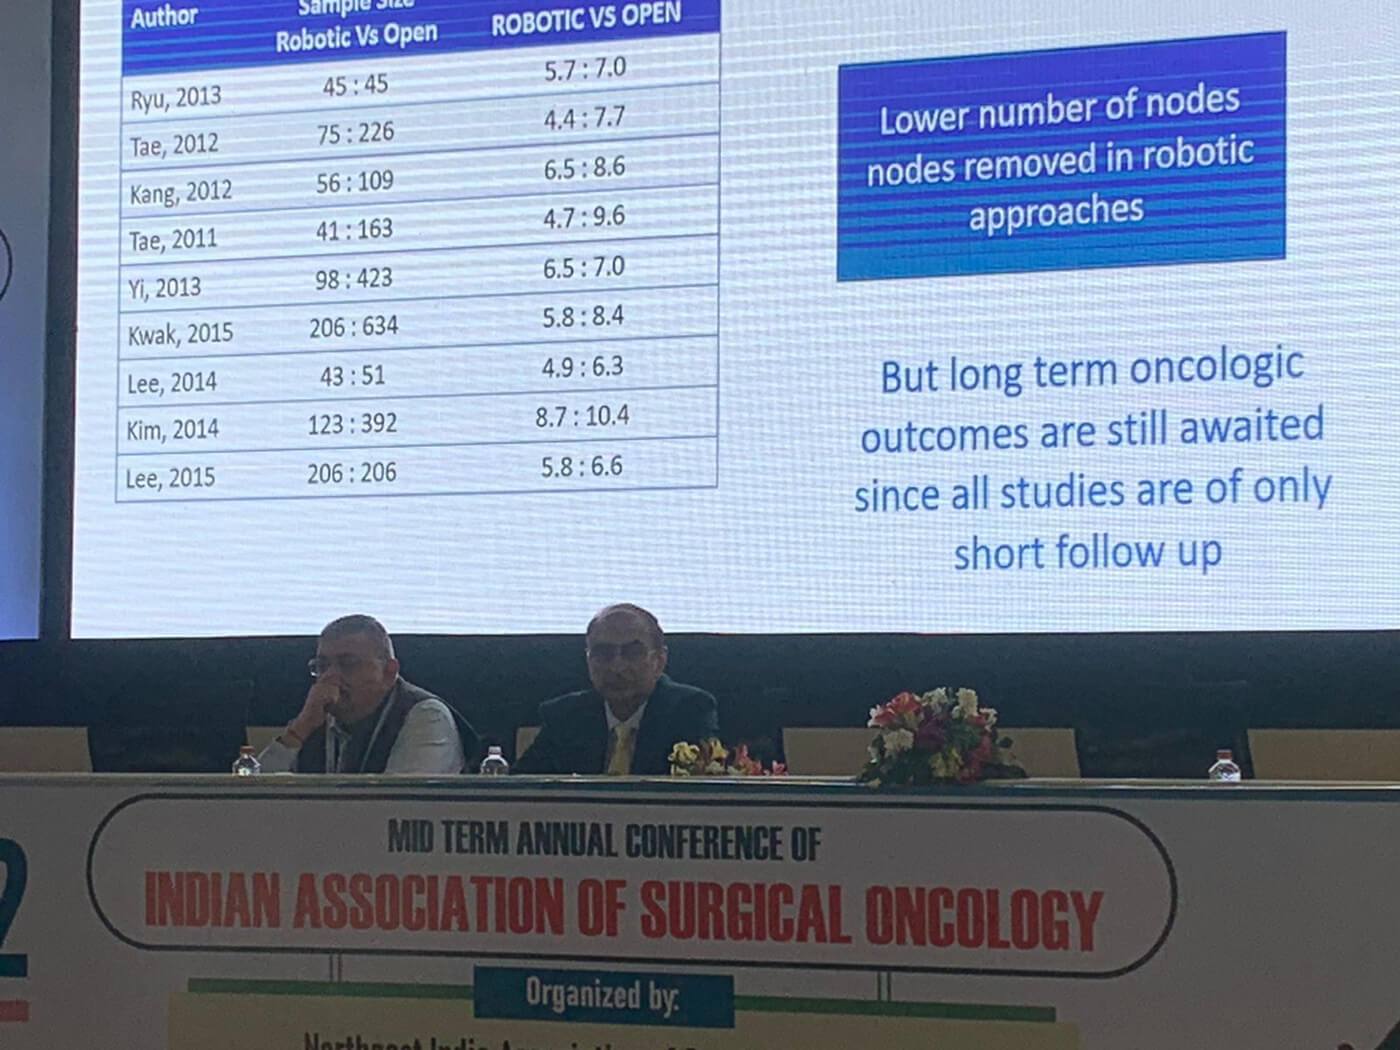 MID-TERM-ANNUAL-CONFERENCE-OF-INDIAN-ASSOCIATION-OF-SURGICAL-ONCOLOGY-2022-2